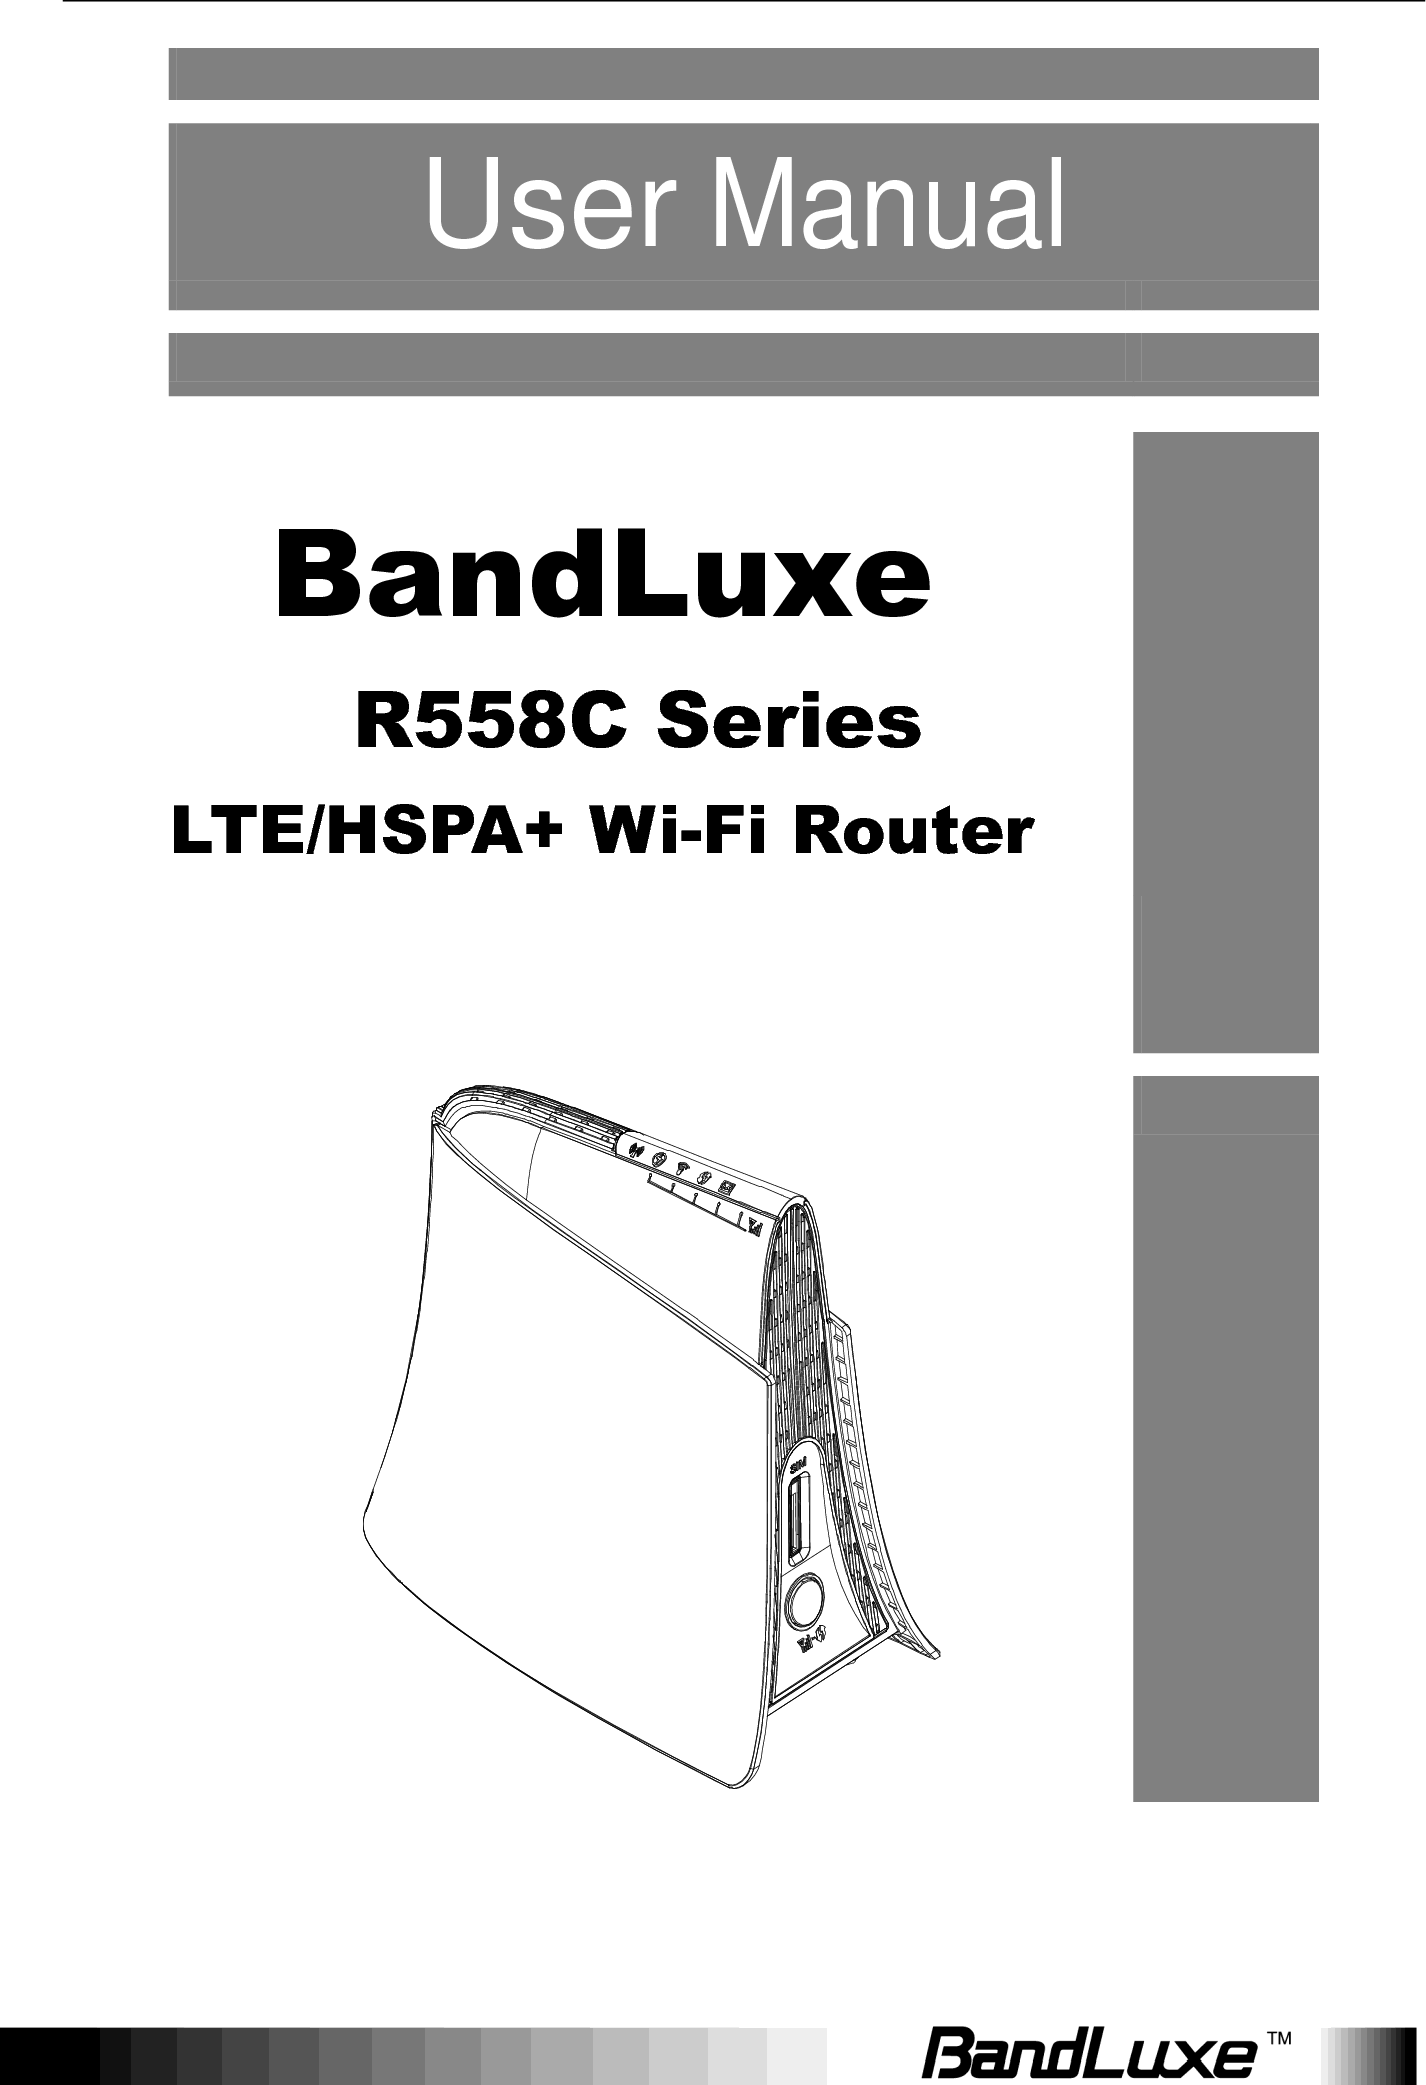       User Manual       BandLuxe R558C Series   LTE/HSPA+ Wi-Fi Router        